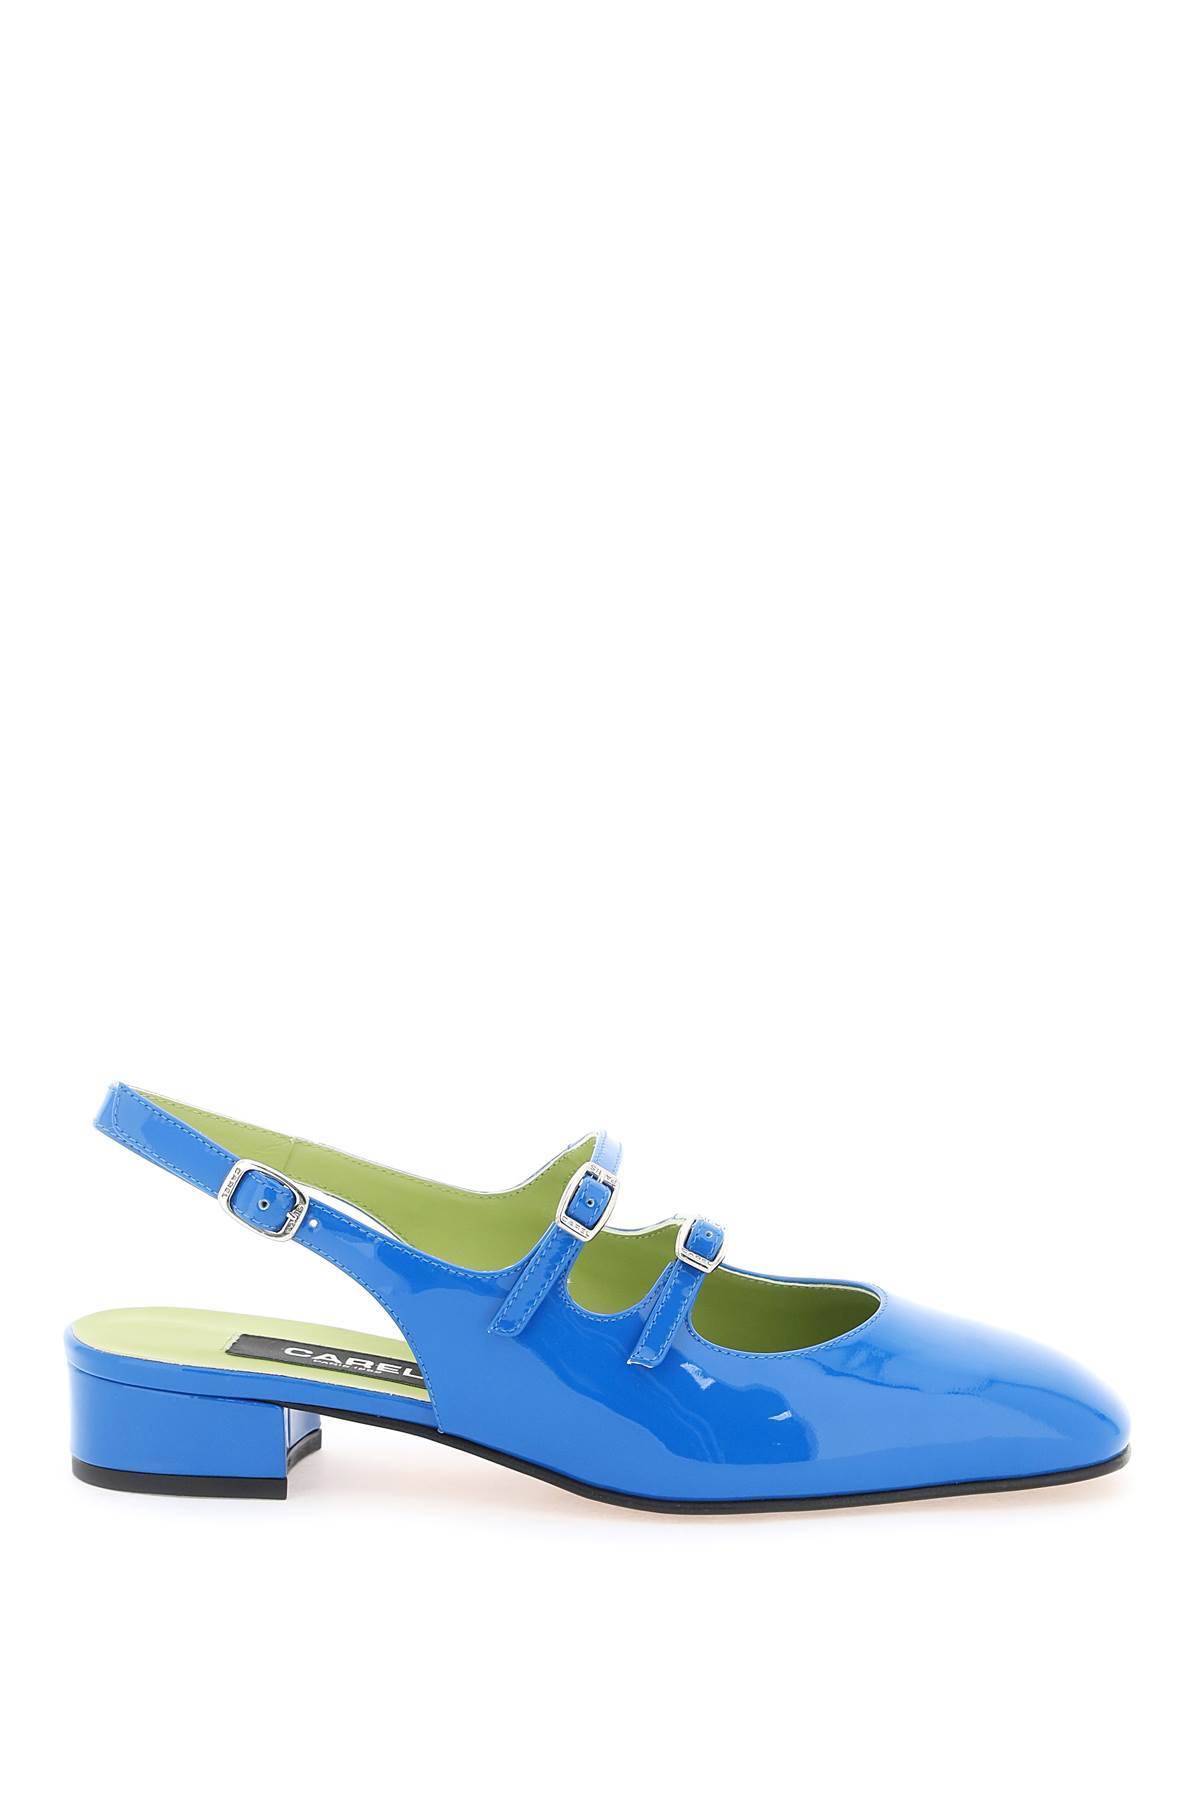 Shop Carel Patent Leather Pêche Slingback Mary Jane In Blue